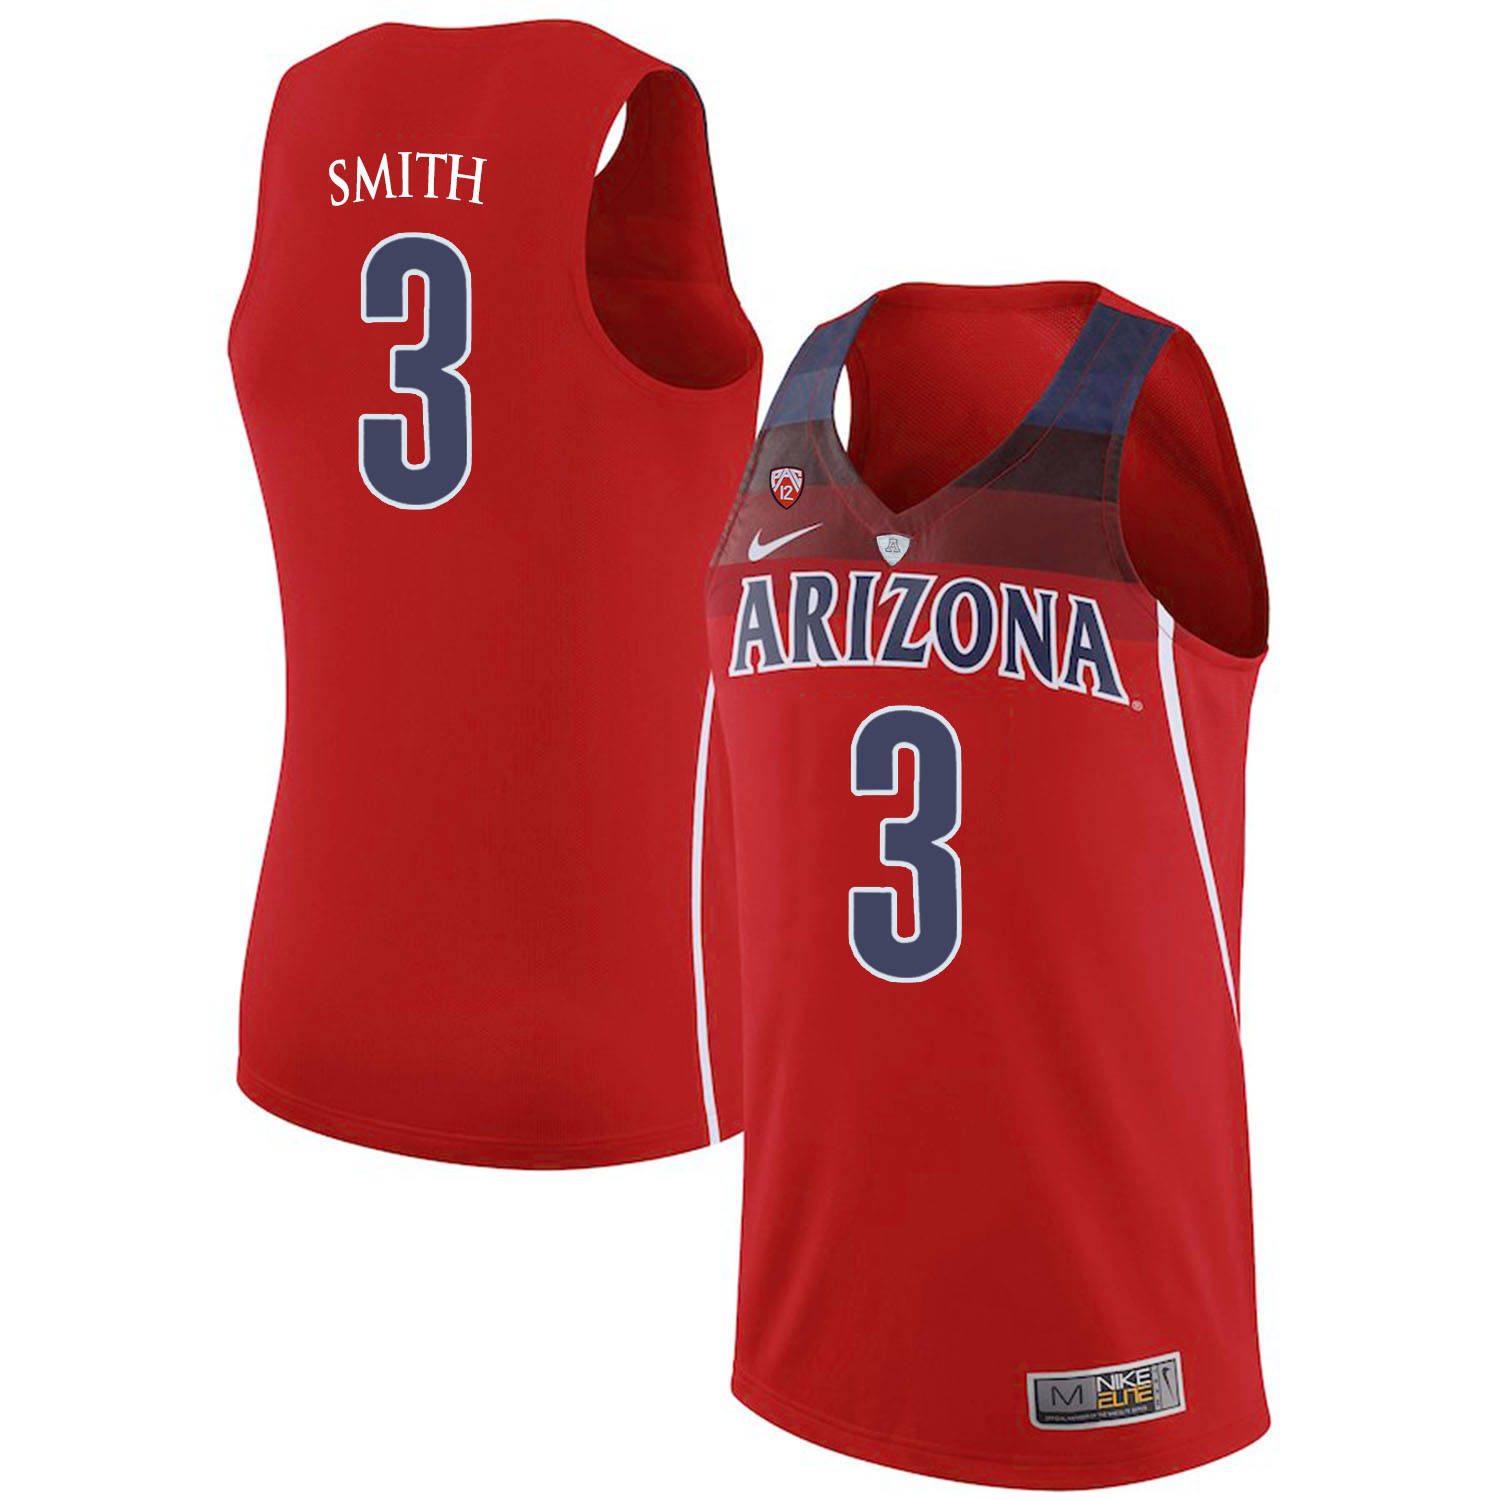 Arizona Wildcats 3 Dylan Smith Red College Basketball Jersey